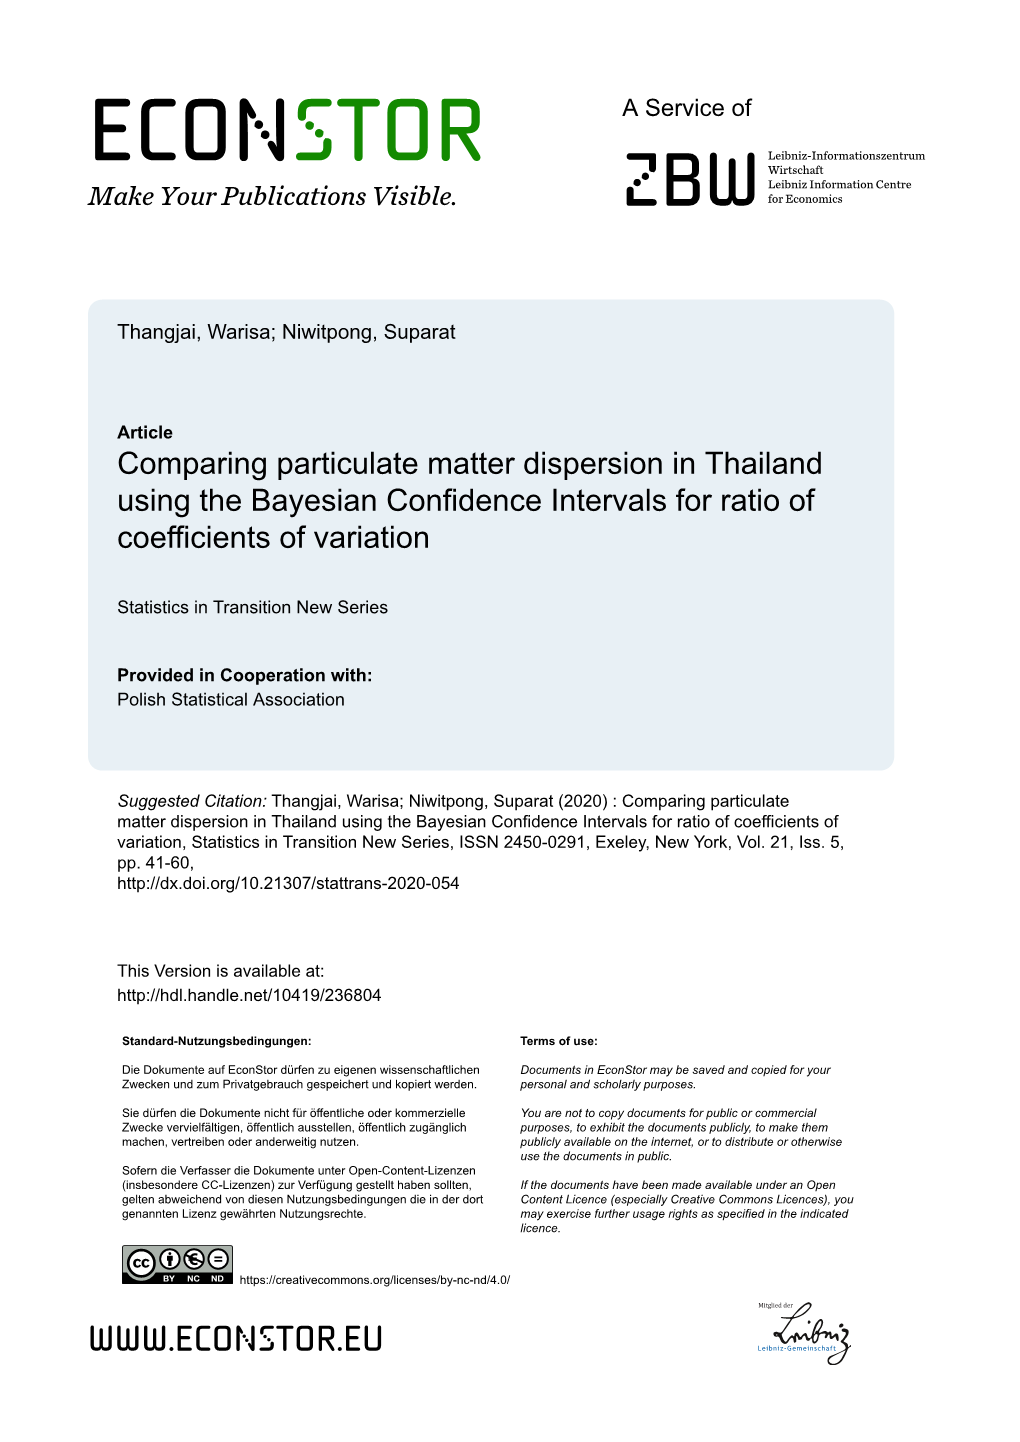 Comparing Particulate Matter Dispersion in Thailand Using the Bayesian Confidence Intervals for Ratio of Coefficients of Variation